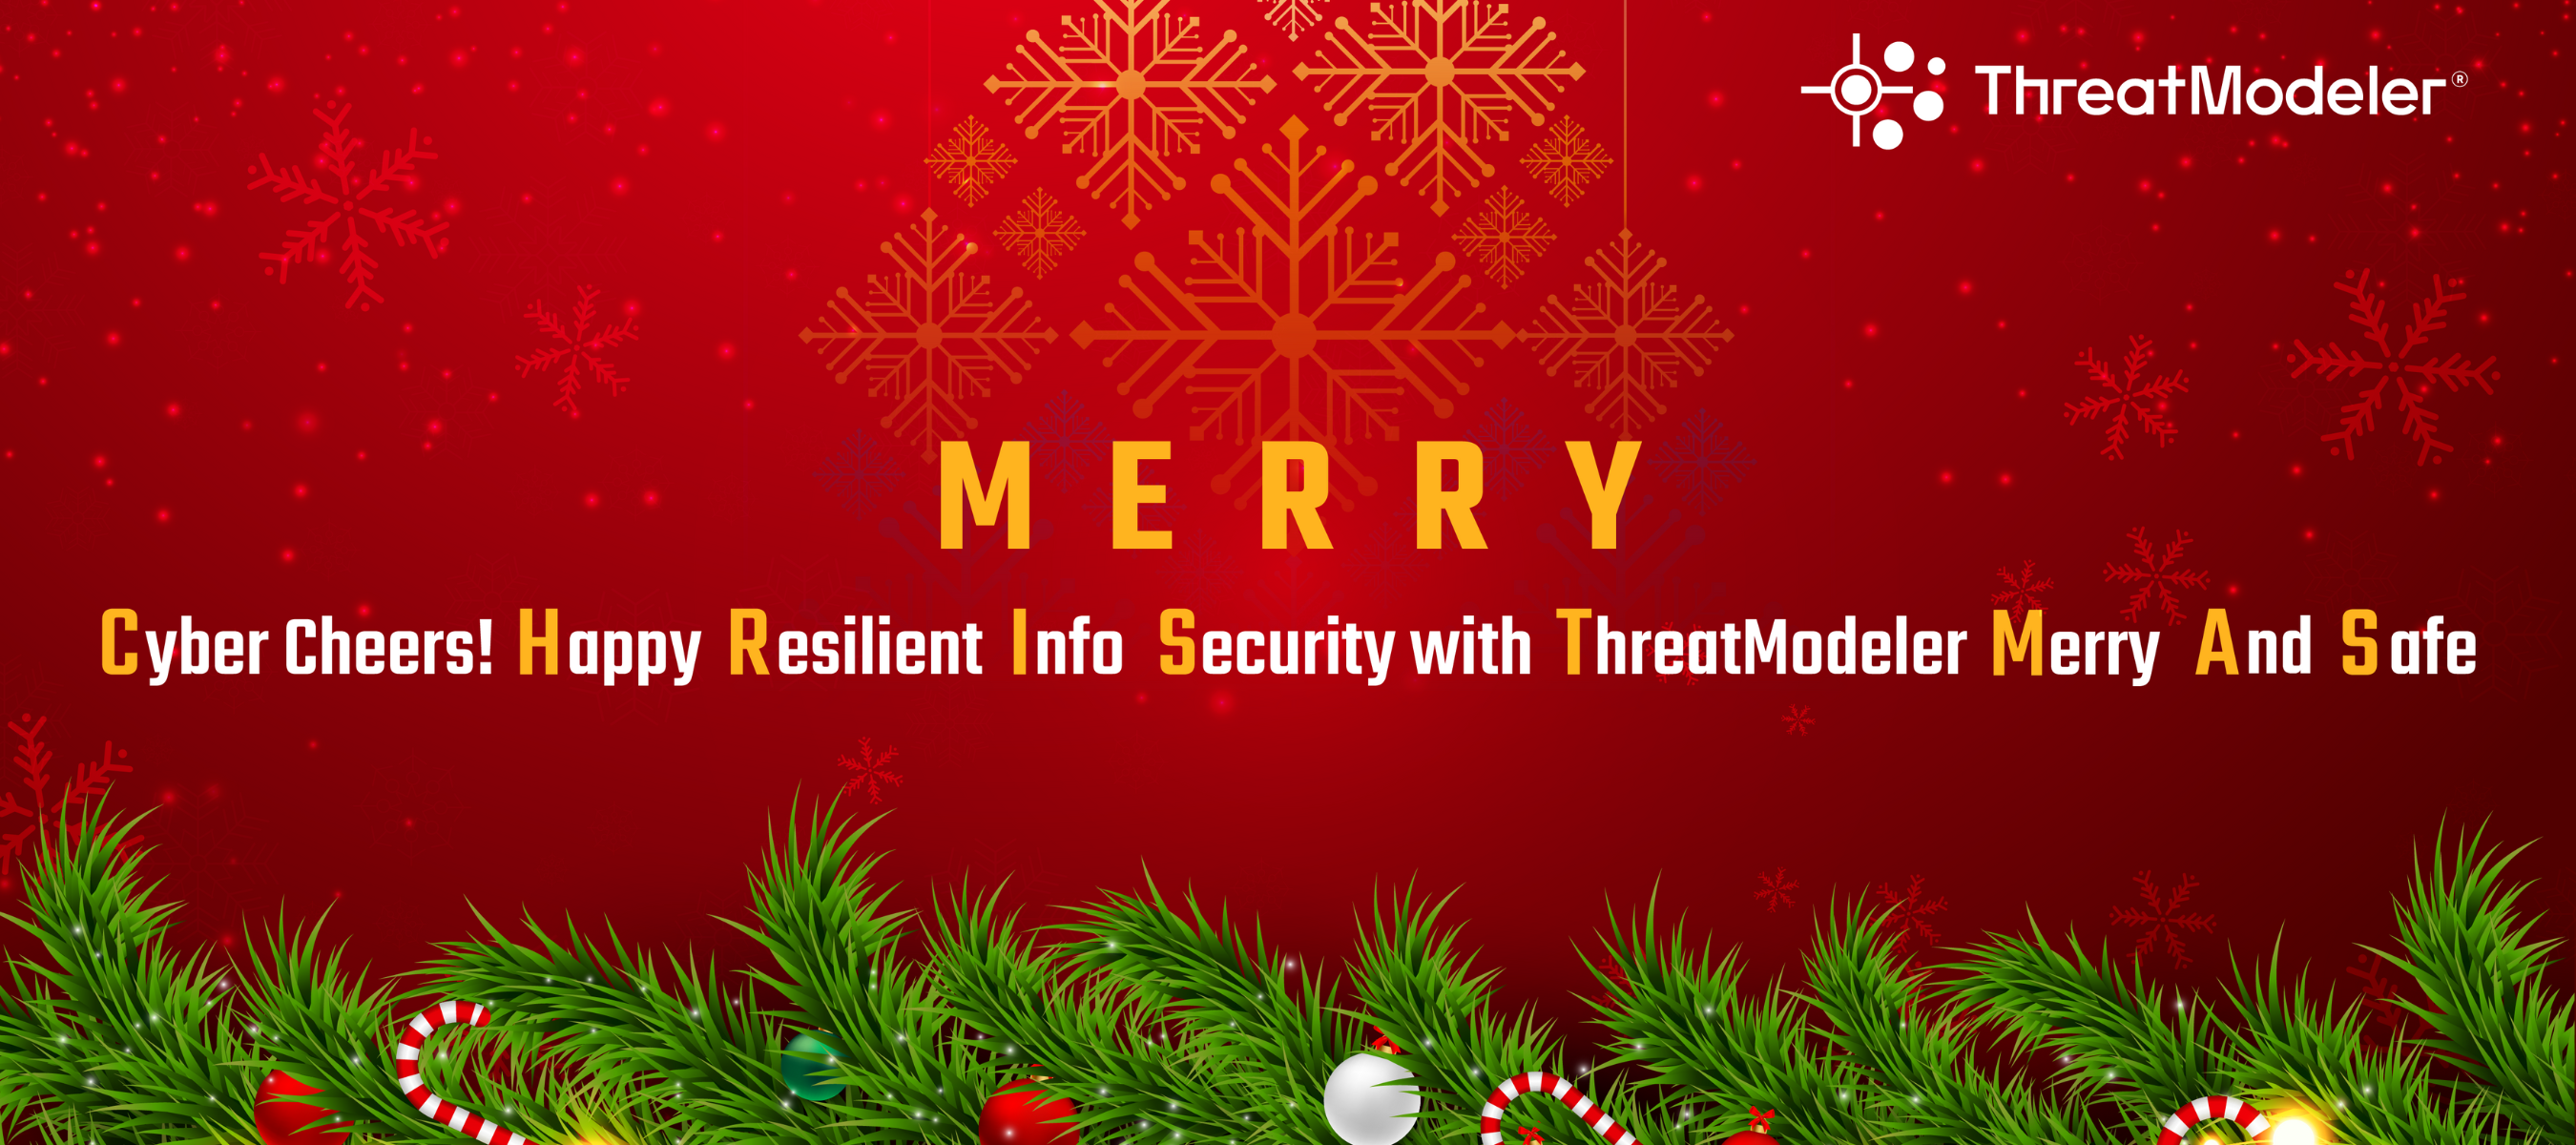 Wishing everyone a cyber-safe holiday season, free from threats!